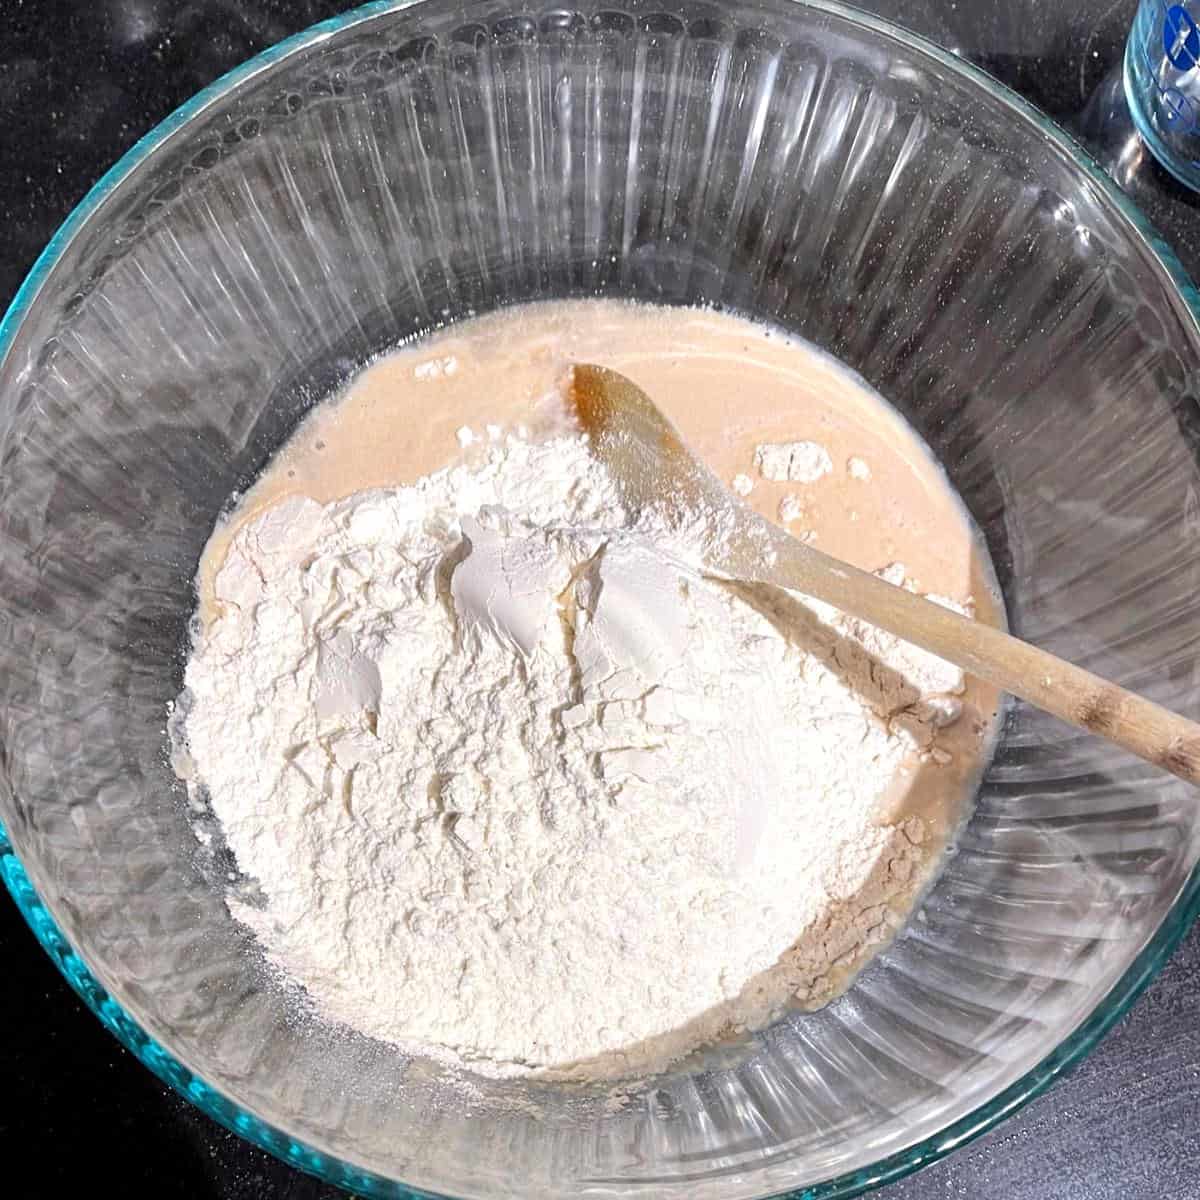 Flour added to bowl with yeast and water.